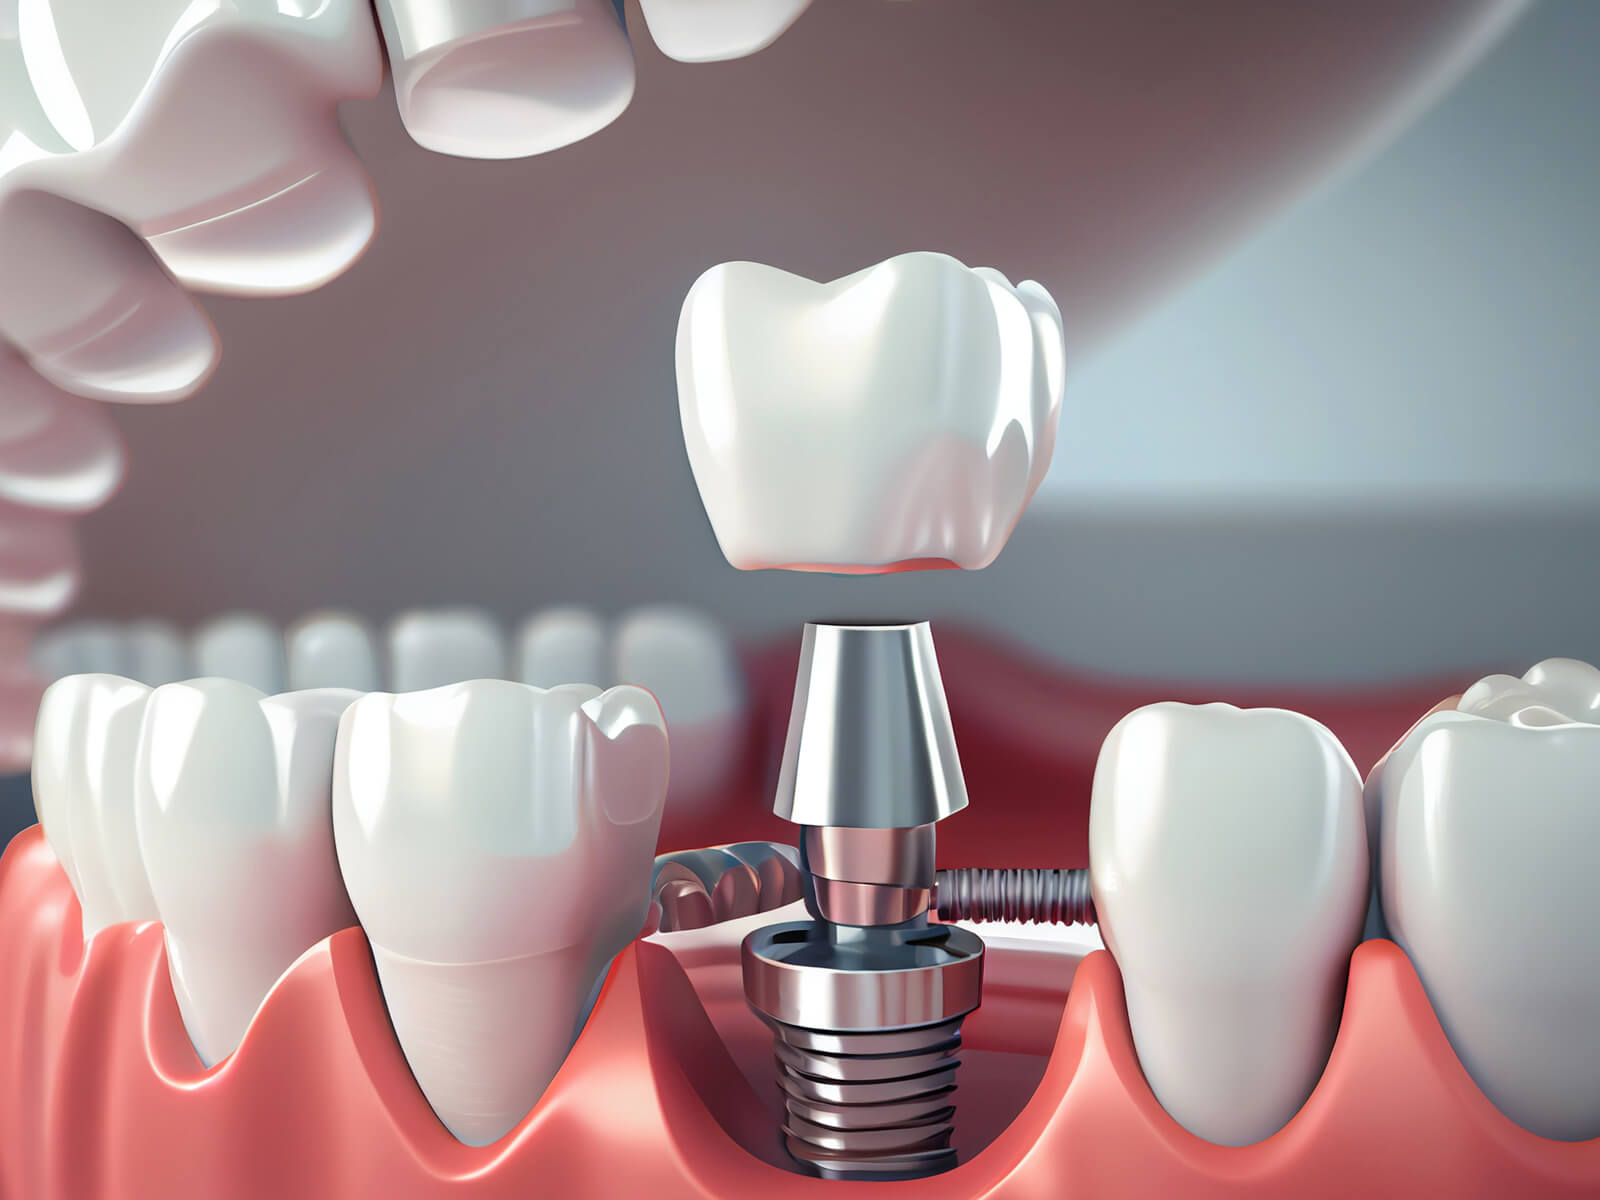 Types Of Crowns For Root Canal-Treated Teeth